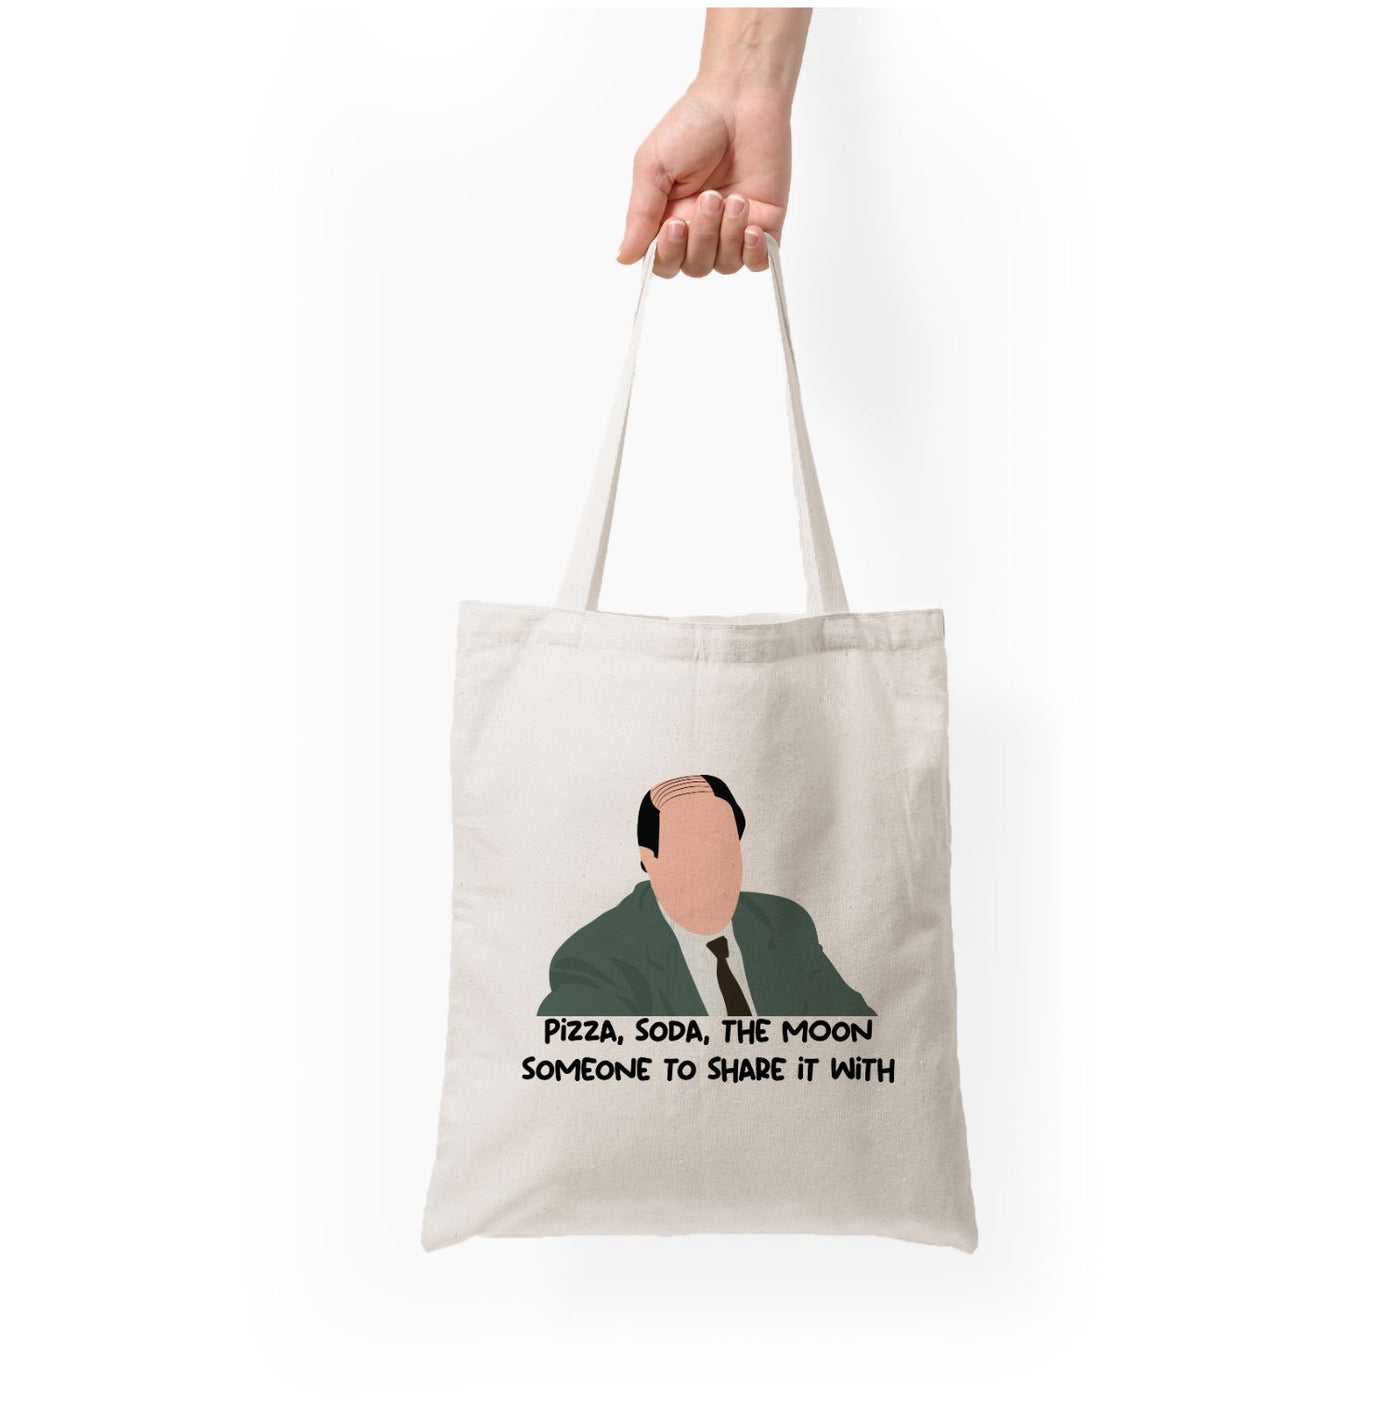 Pizza, Soda, The Moon - The Office Tote Bag